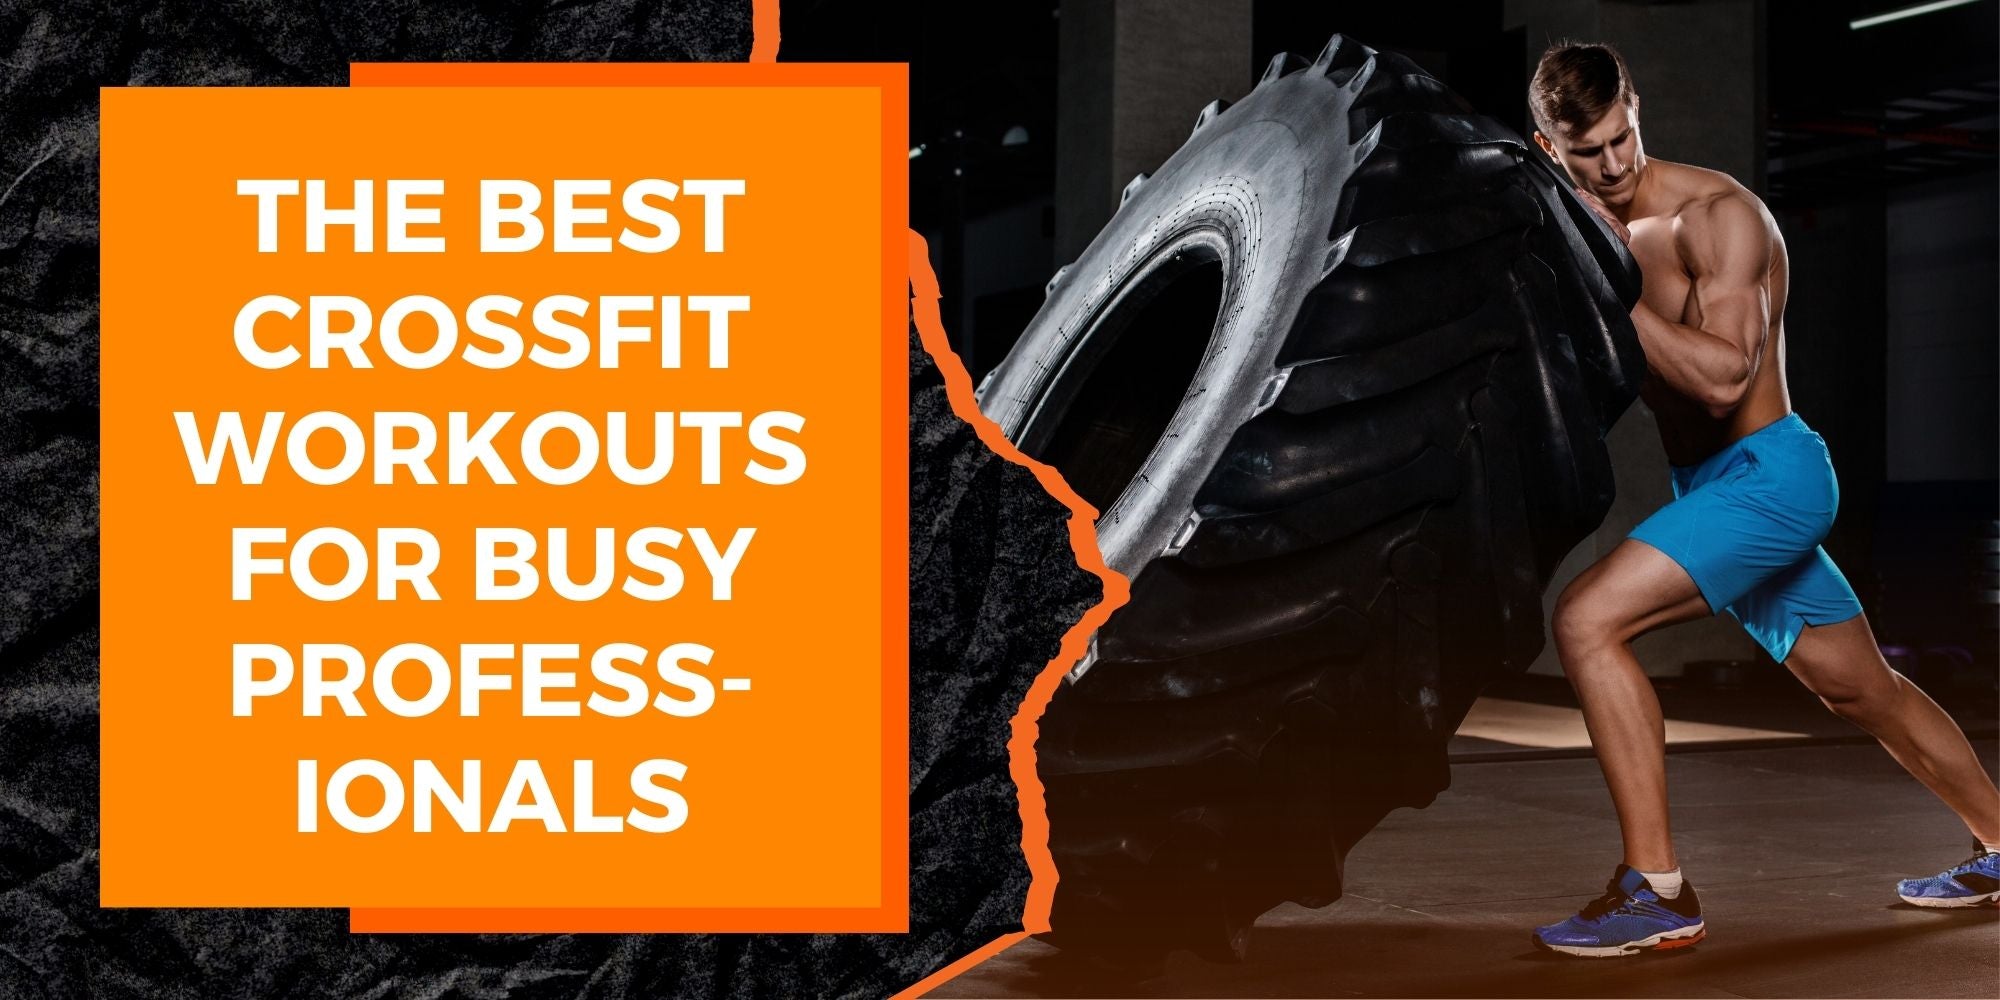 The Best CrossFit Workouts for Busy Professionals